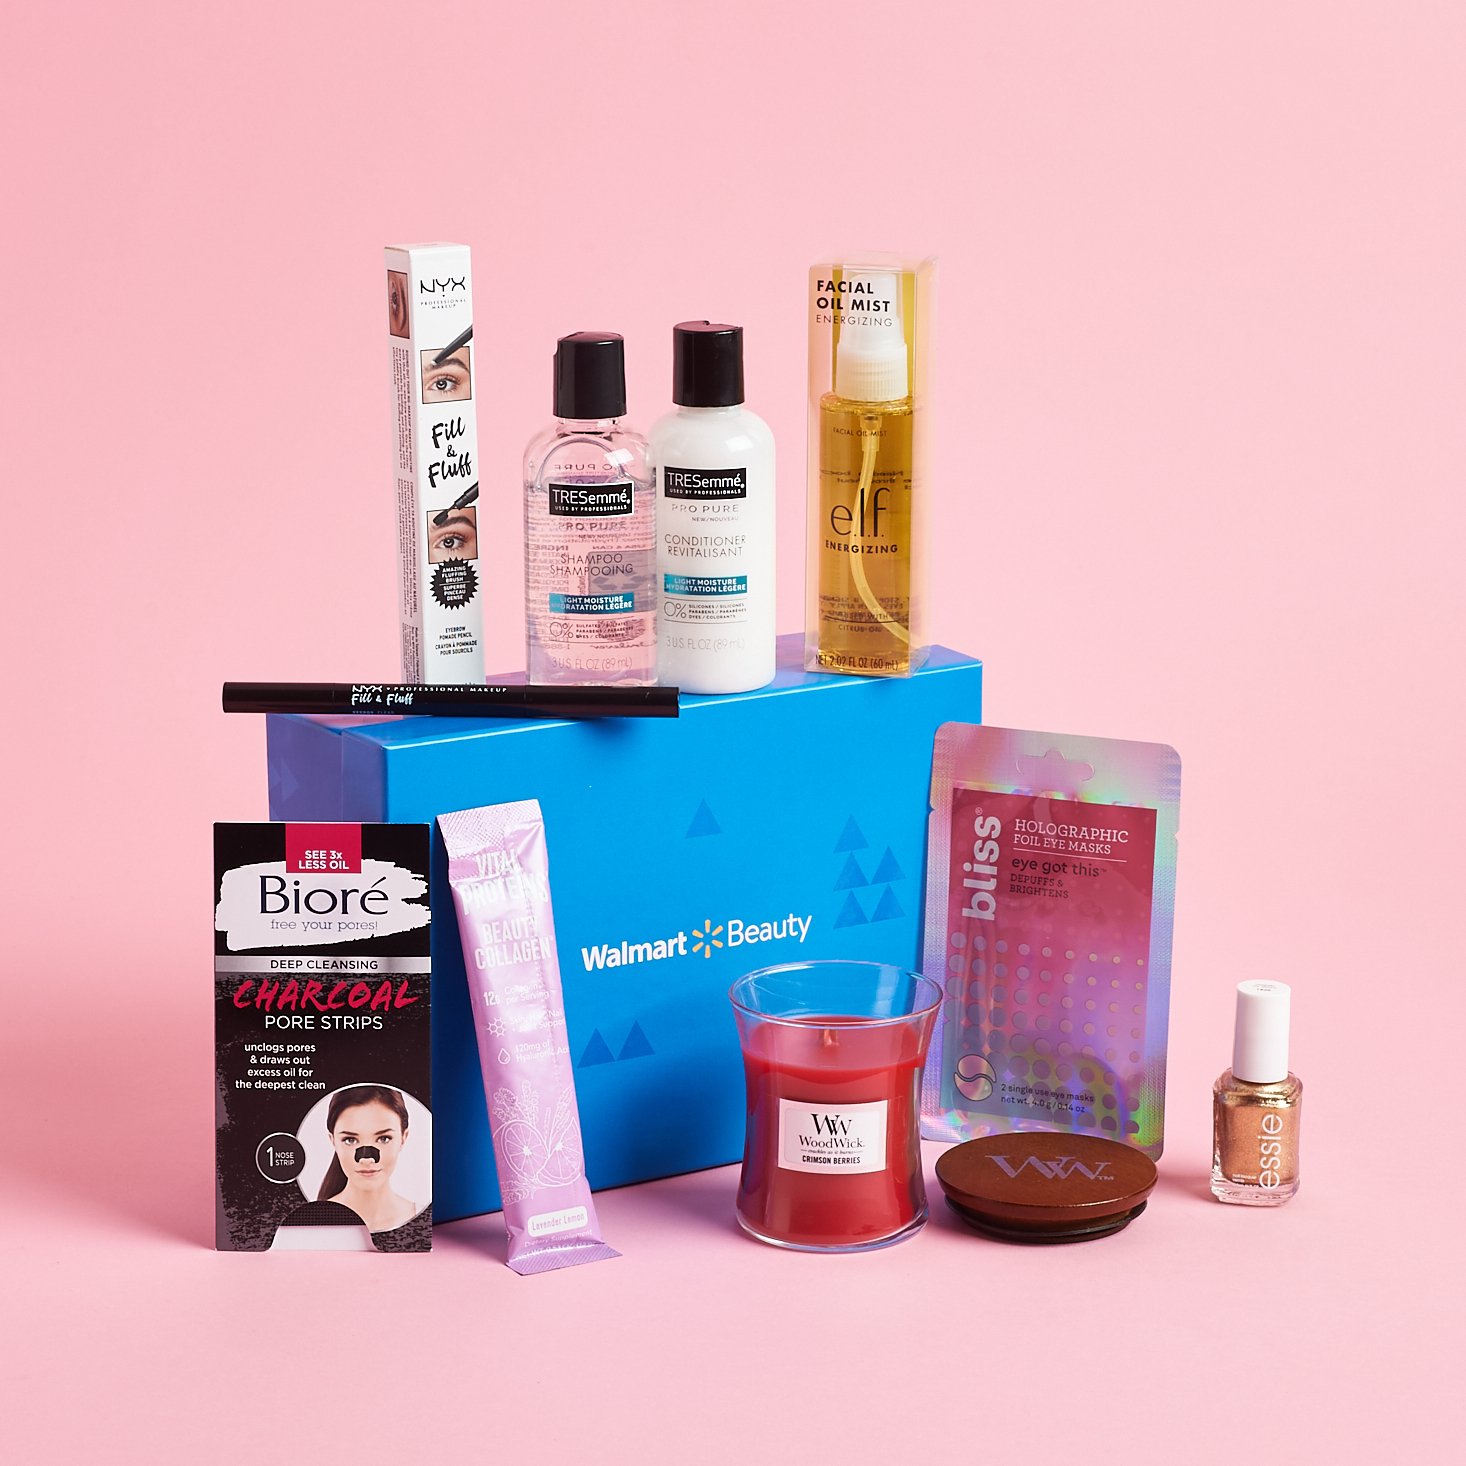 Walmart Limited Edition Winter Beauty Box Review – December 2020